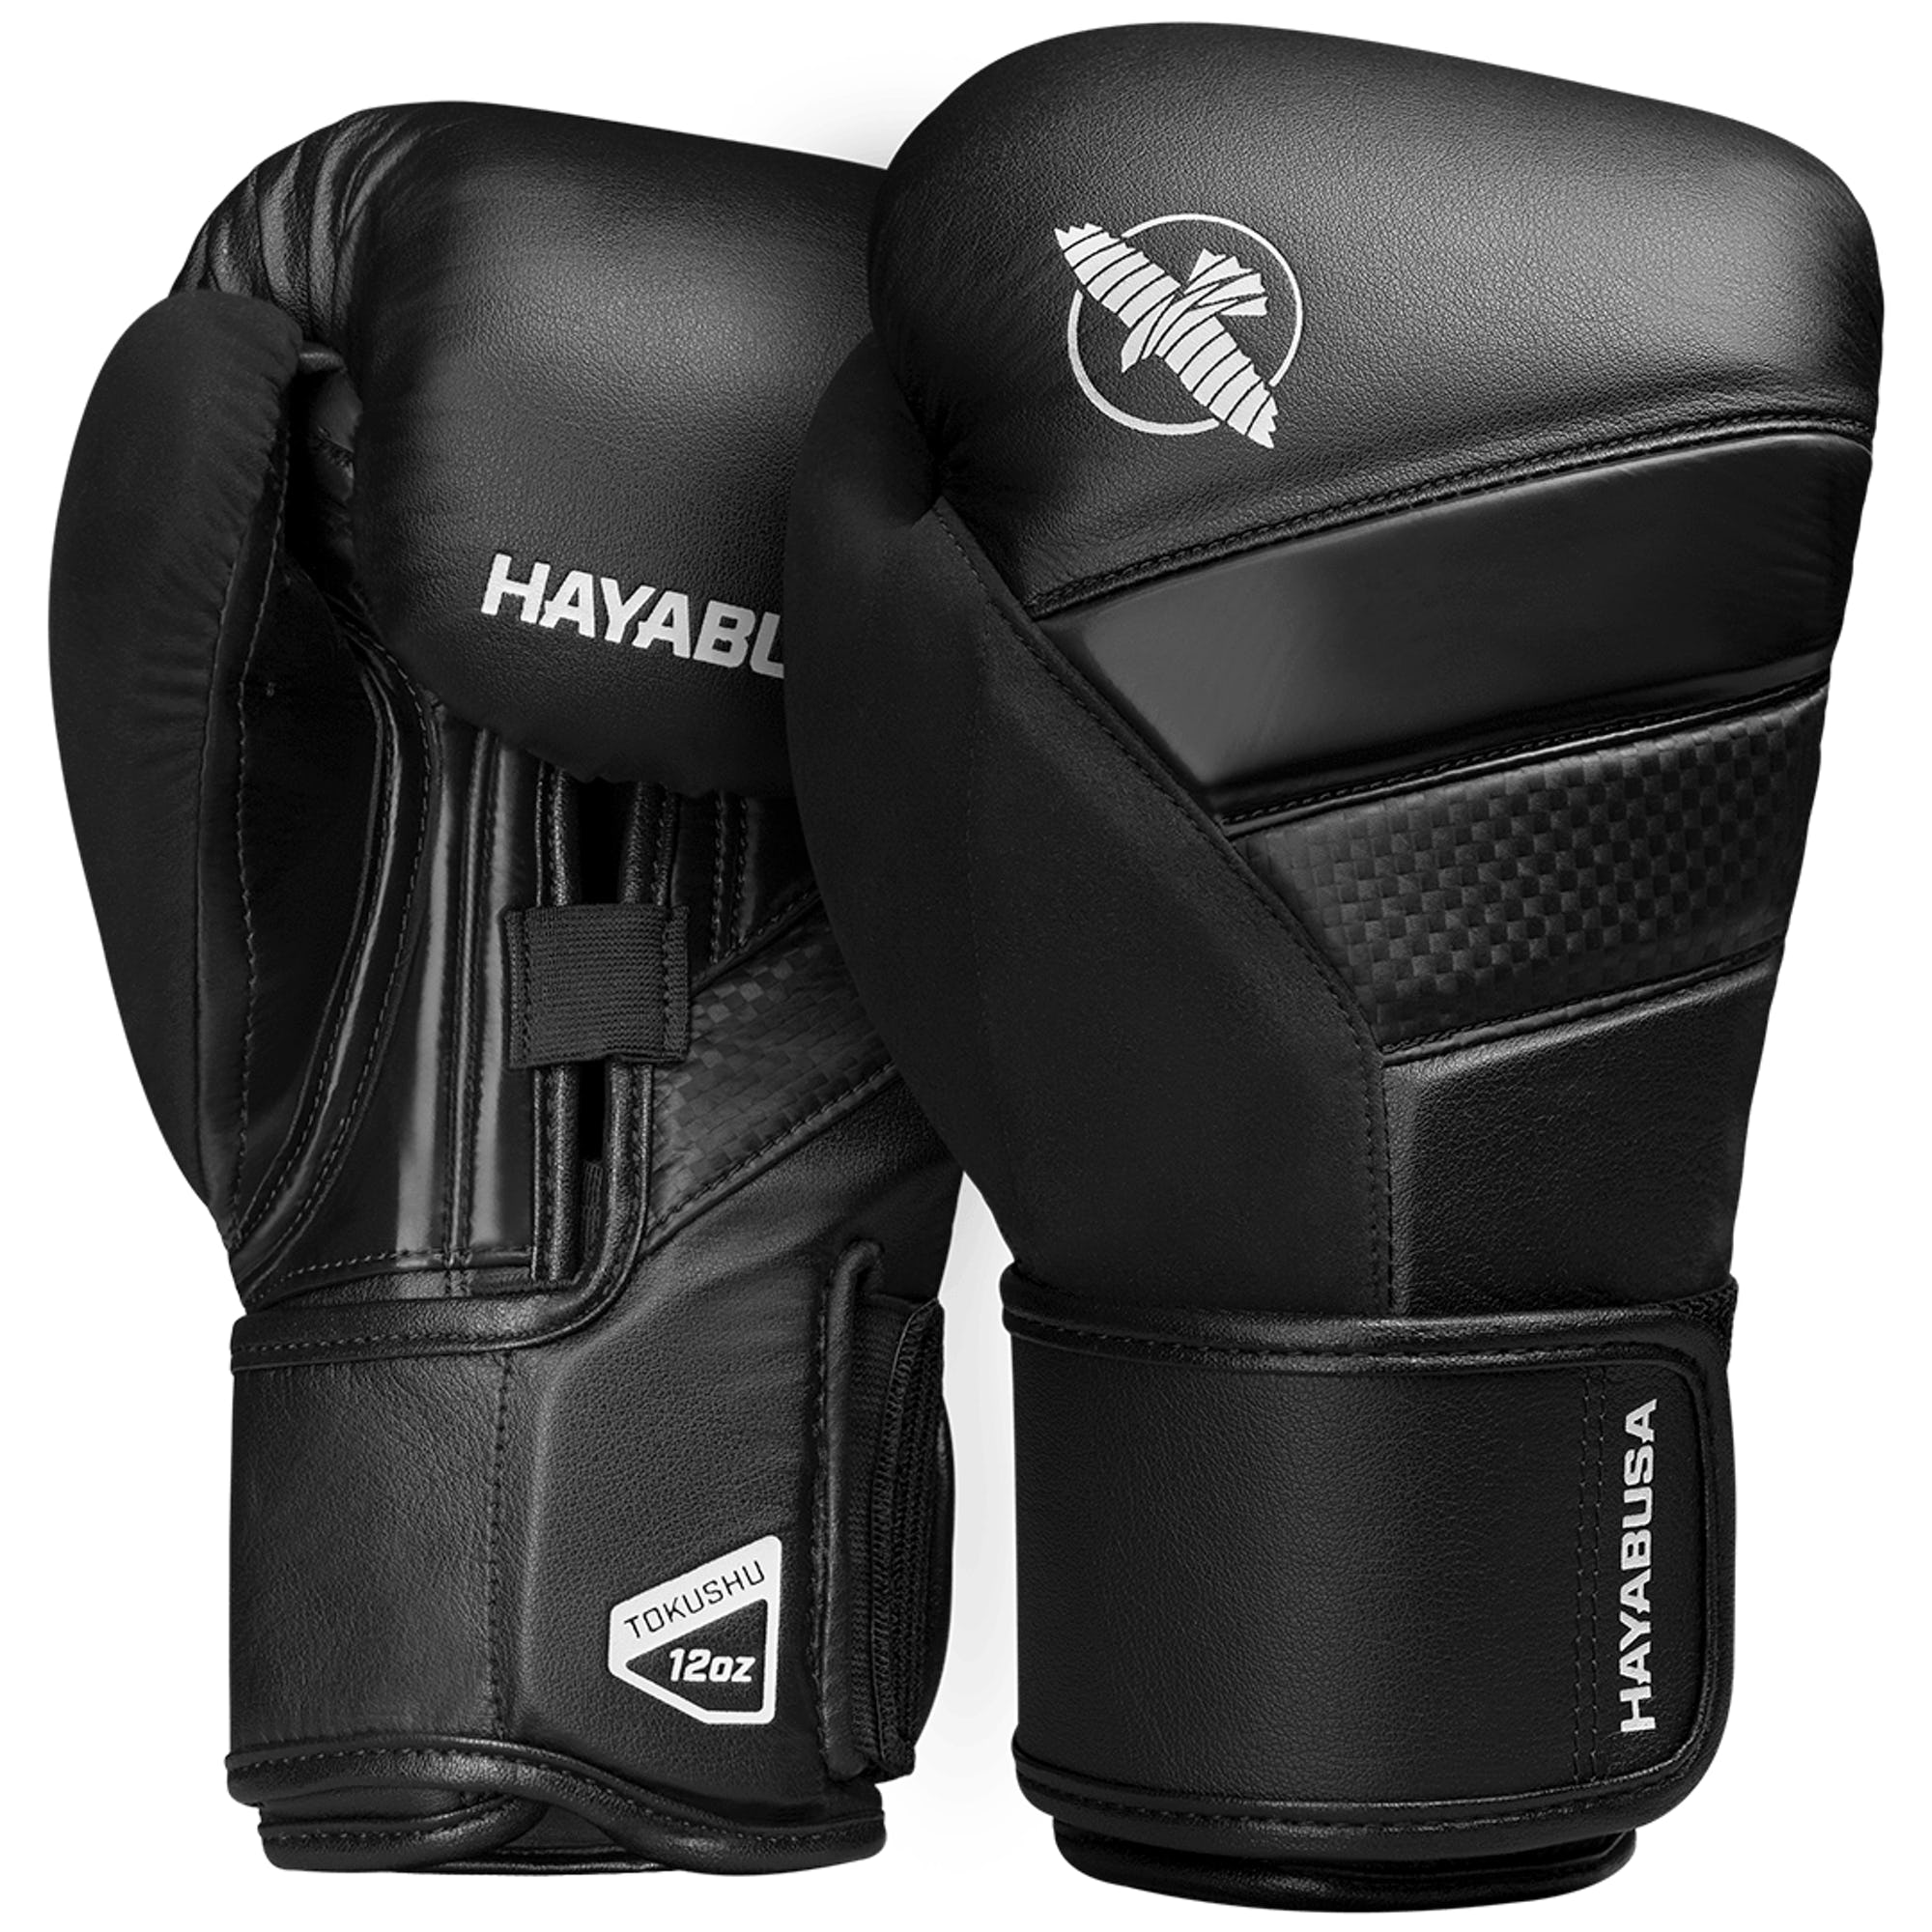 Hayabusa | Boxing Gloves - T3 - XTC Fitness - Exercise Equipment Superstore - Canada - Boxing Gloves